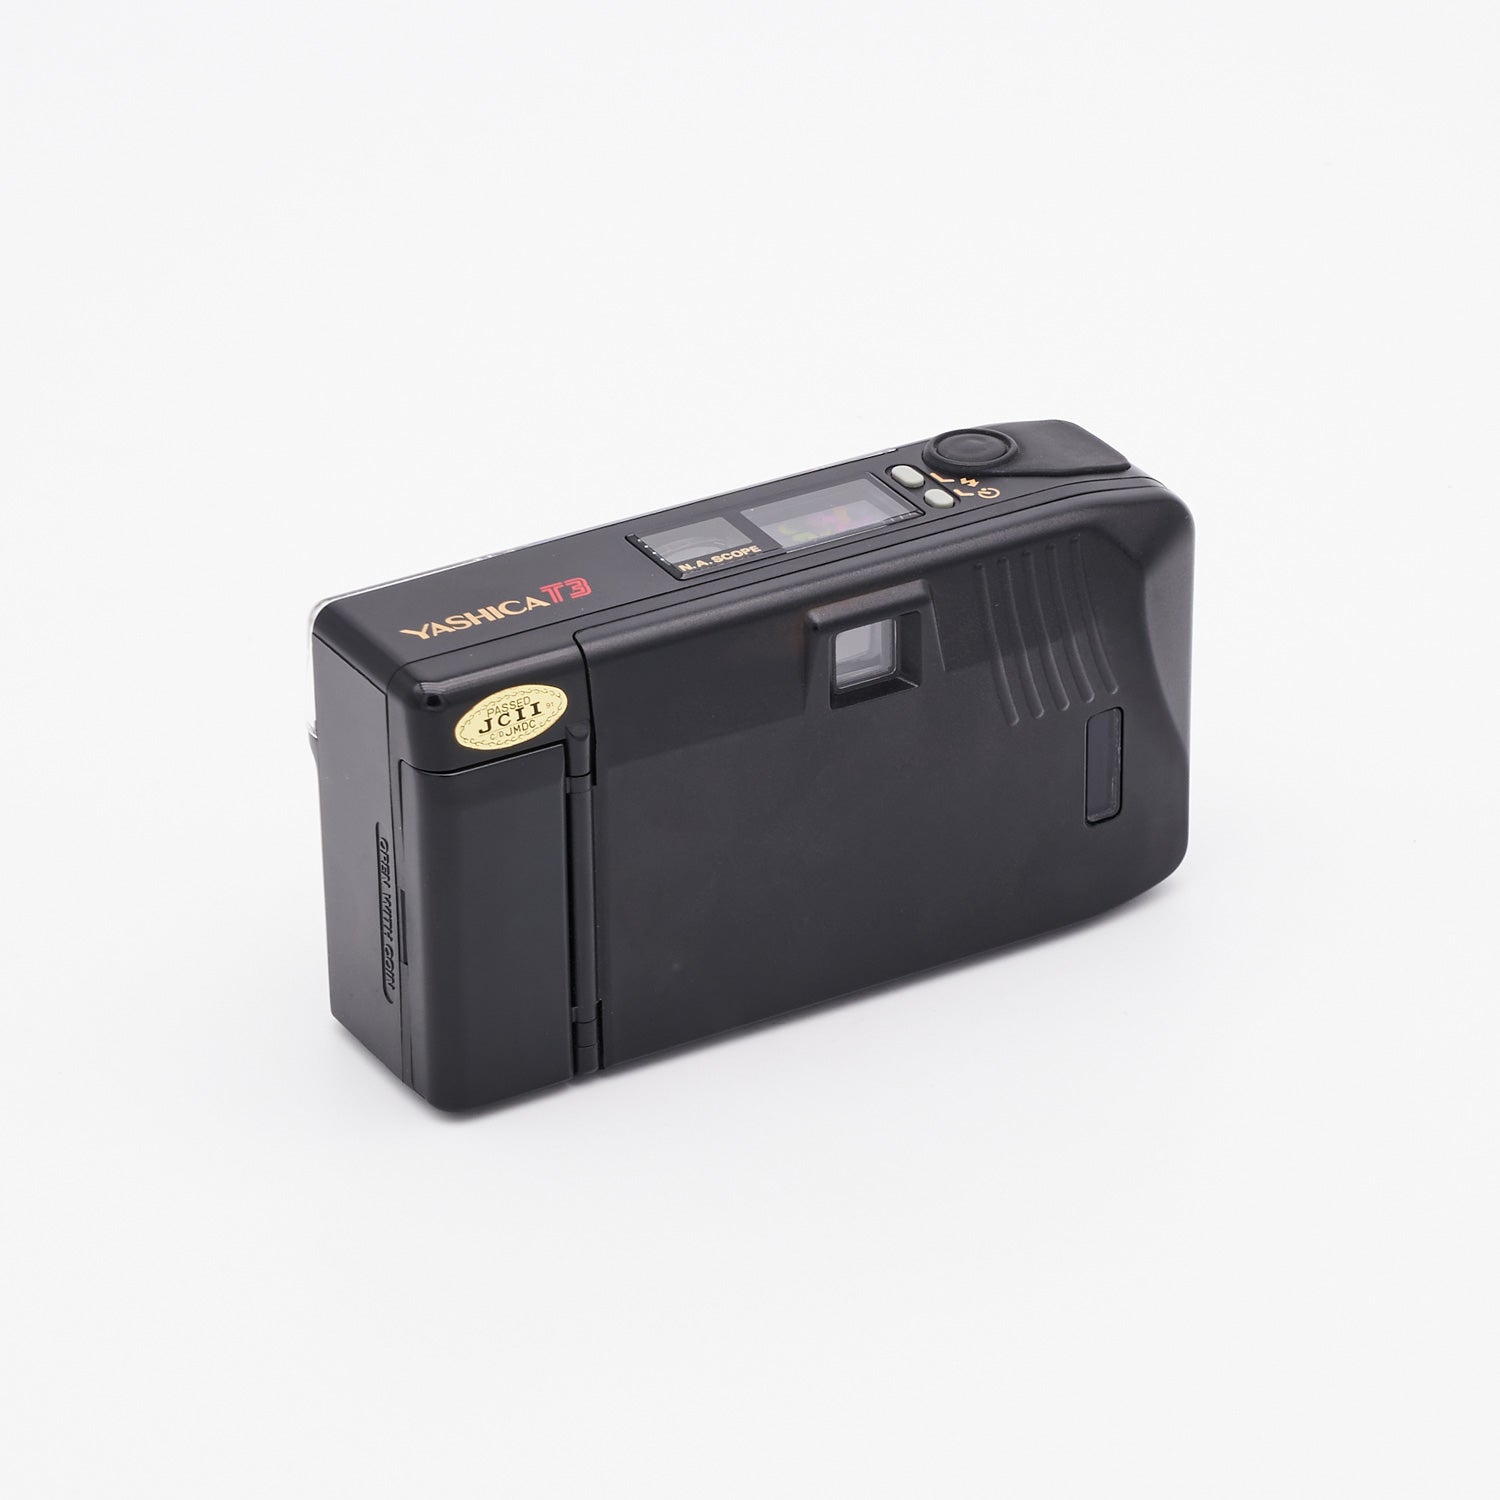 Yashica T3 (S/N 870765)